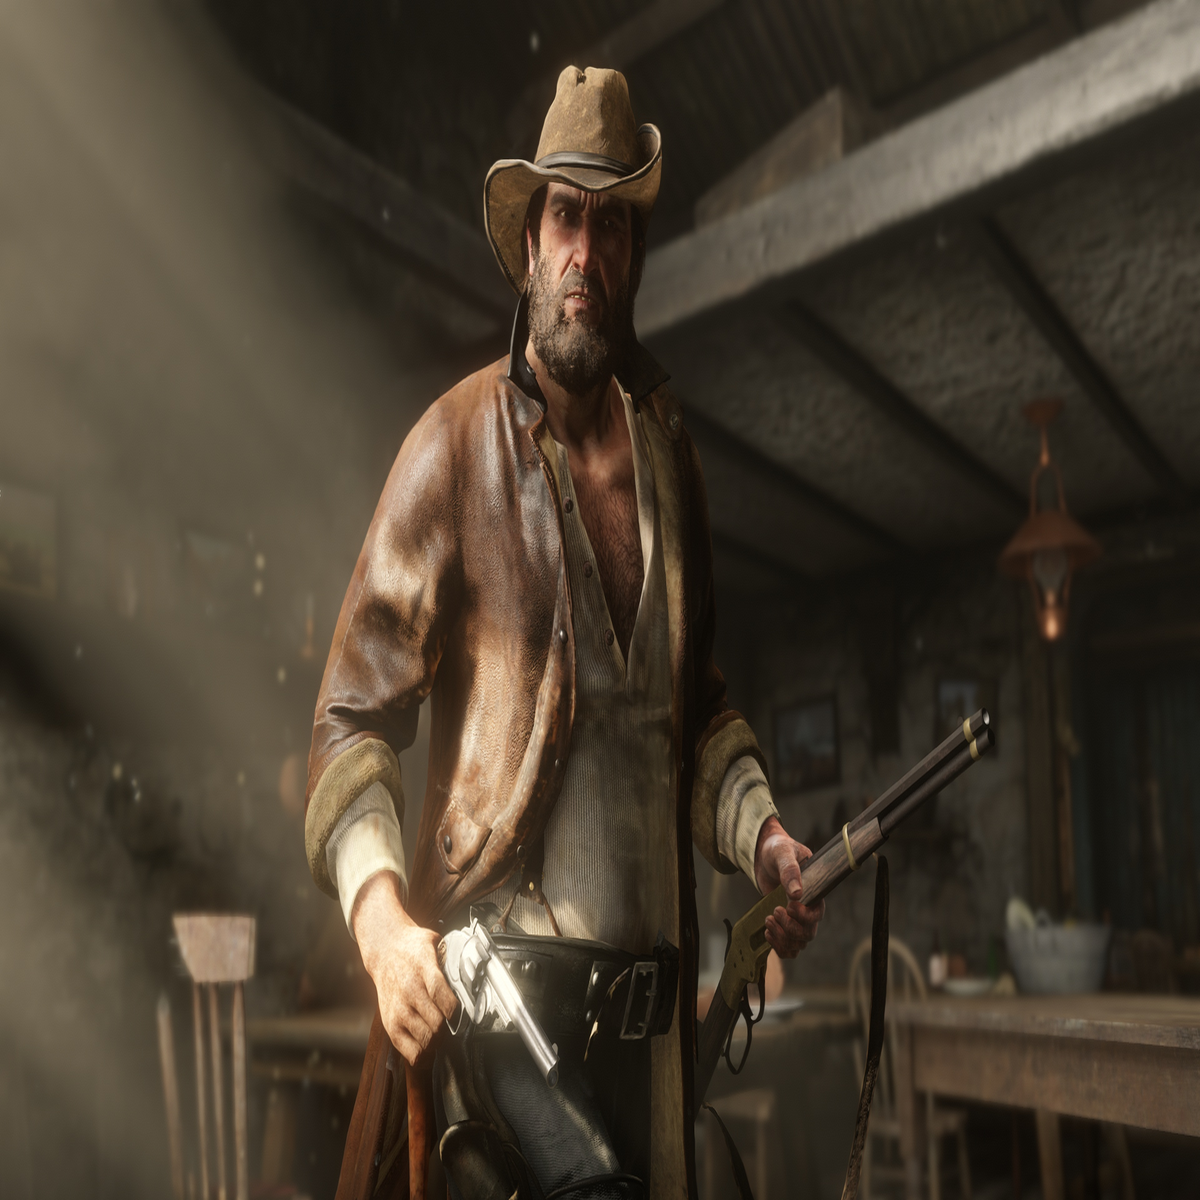 Rockstar drops new Red Dead Redemption 2 PC launch trailer and screenshots